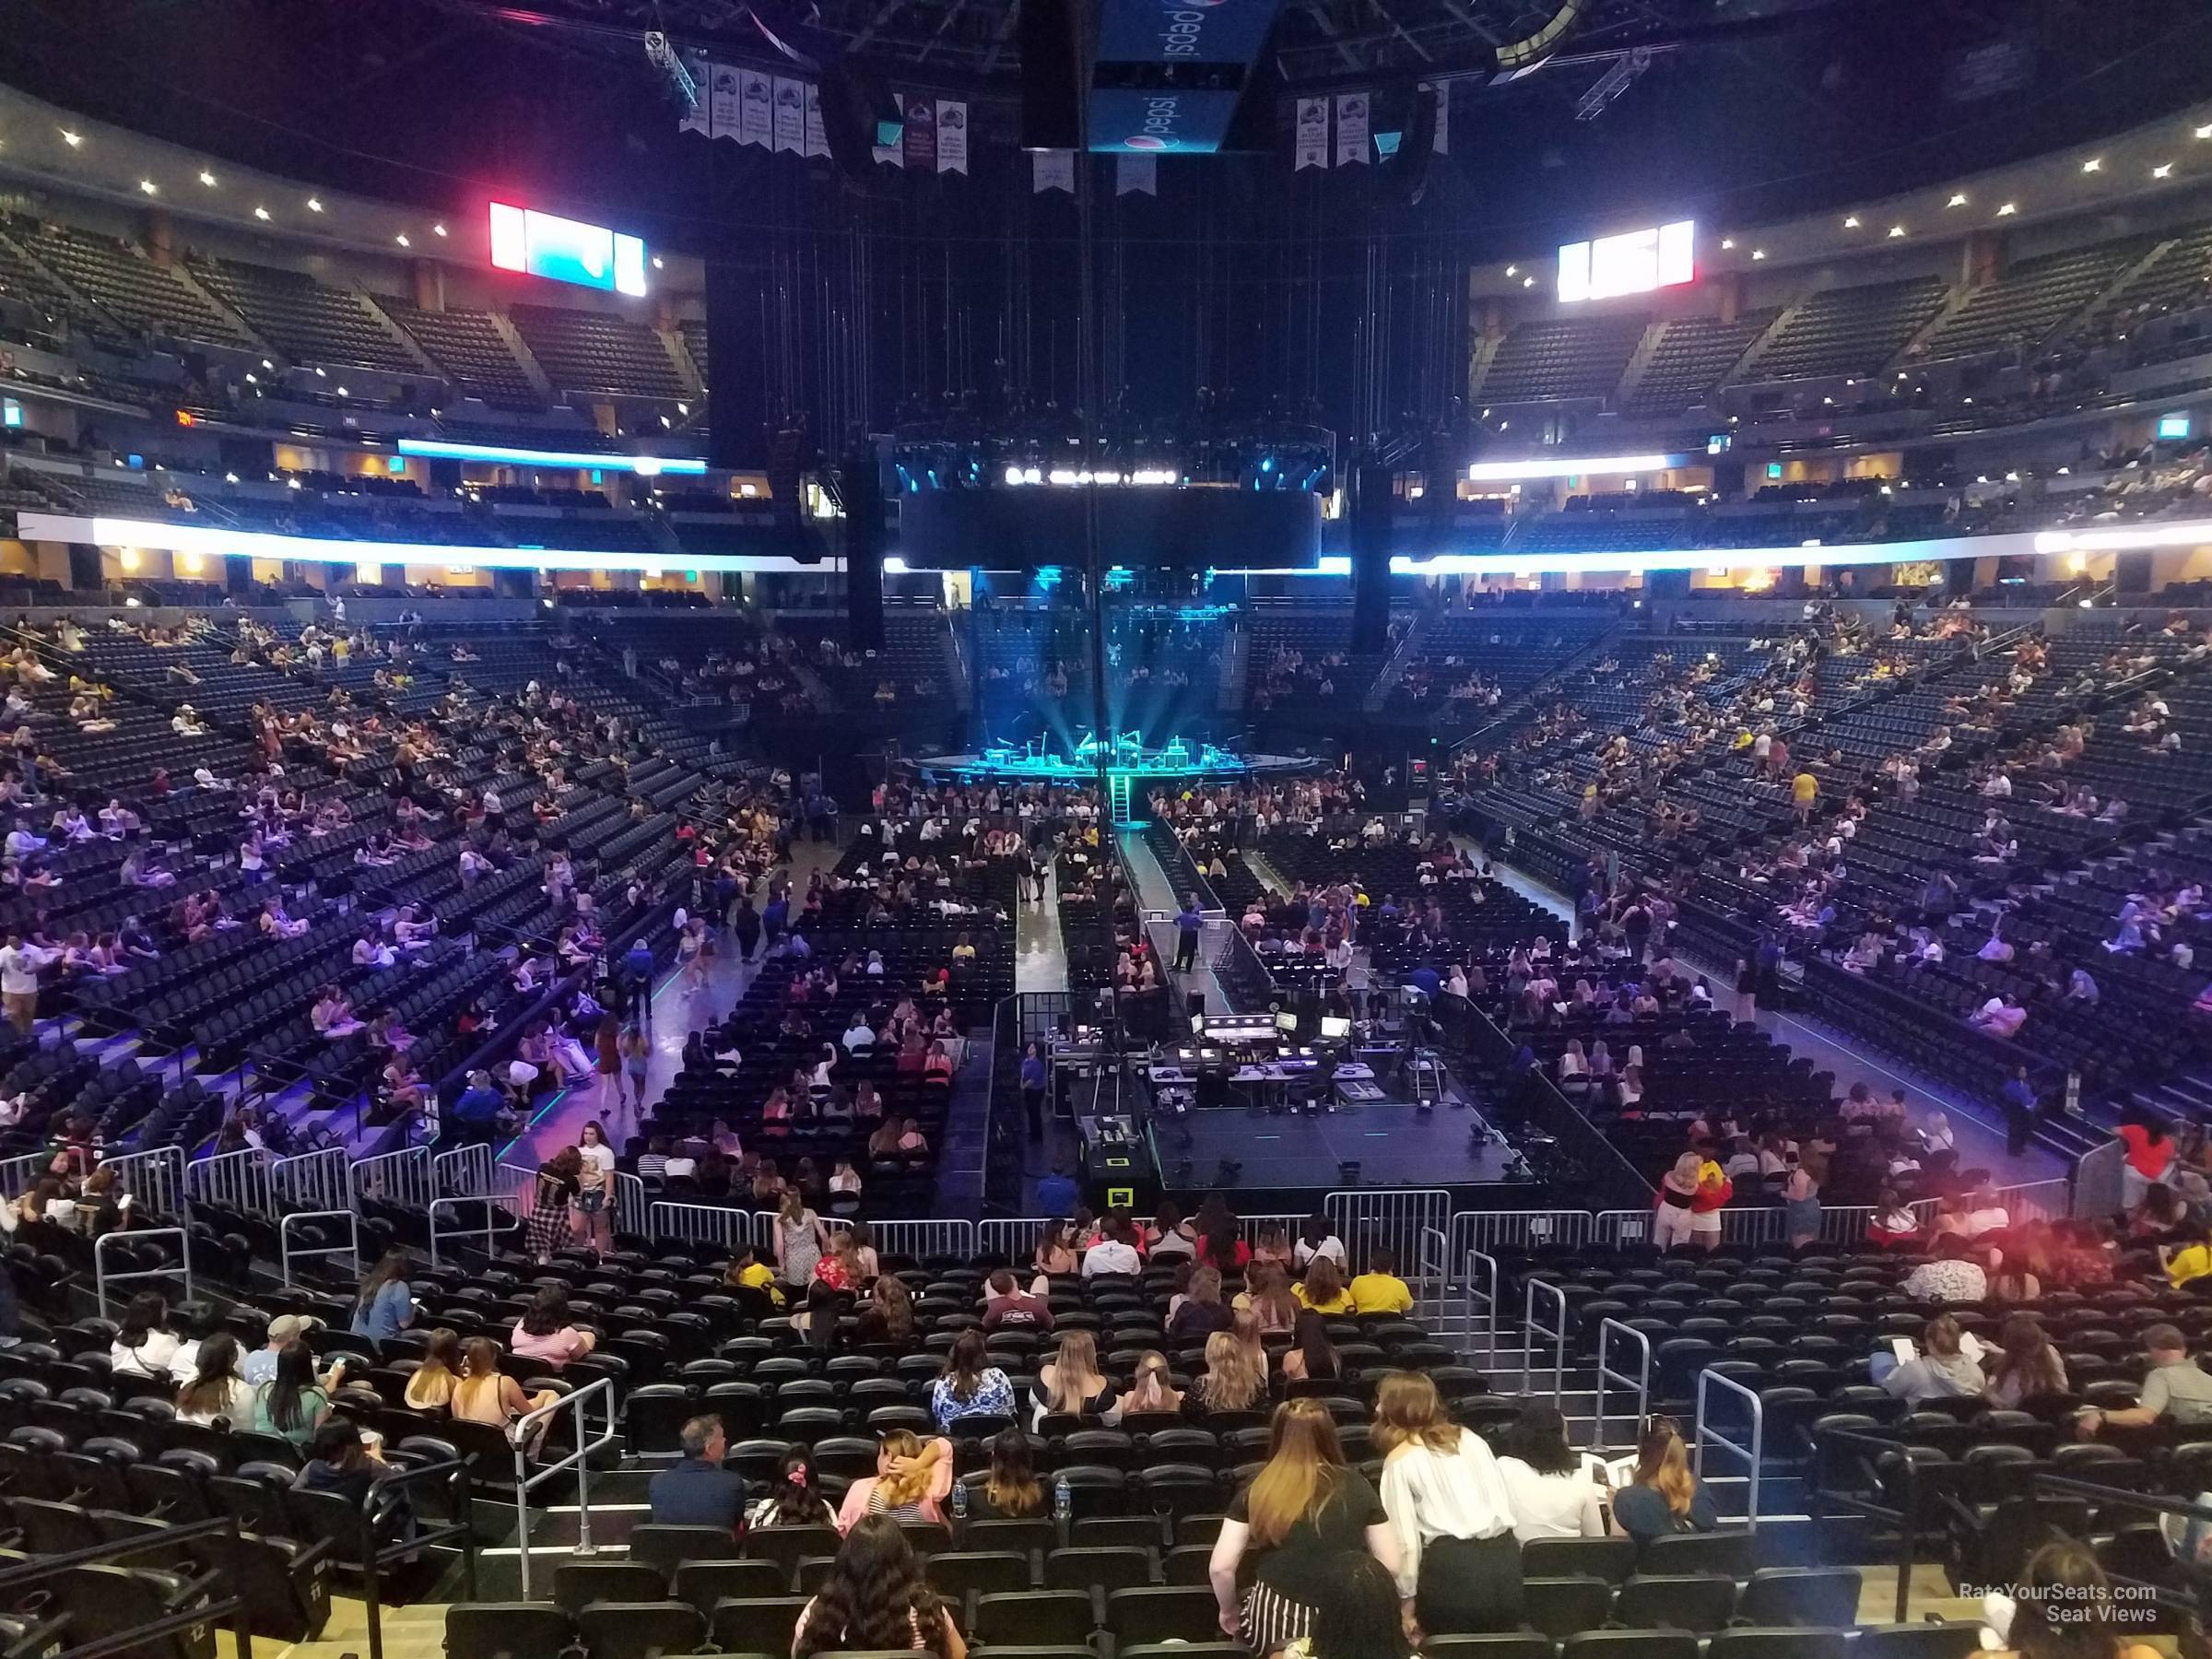 section 114, row 19 seat view  for concert - ball arena